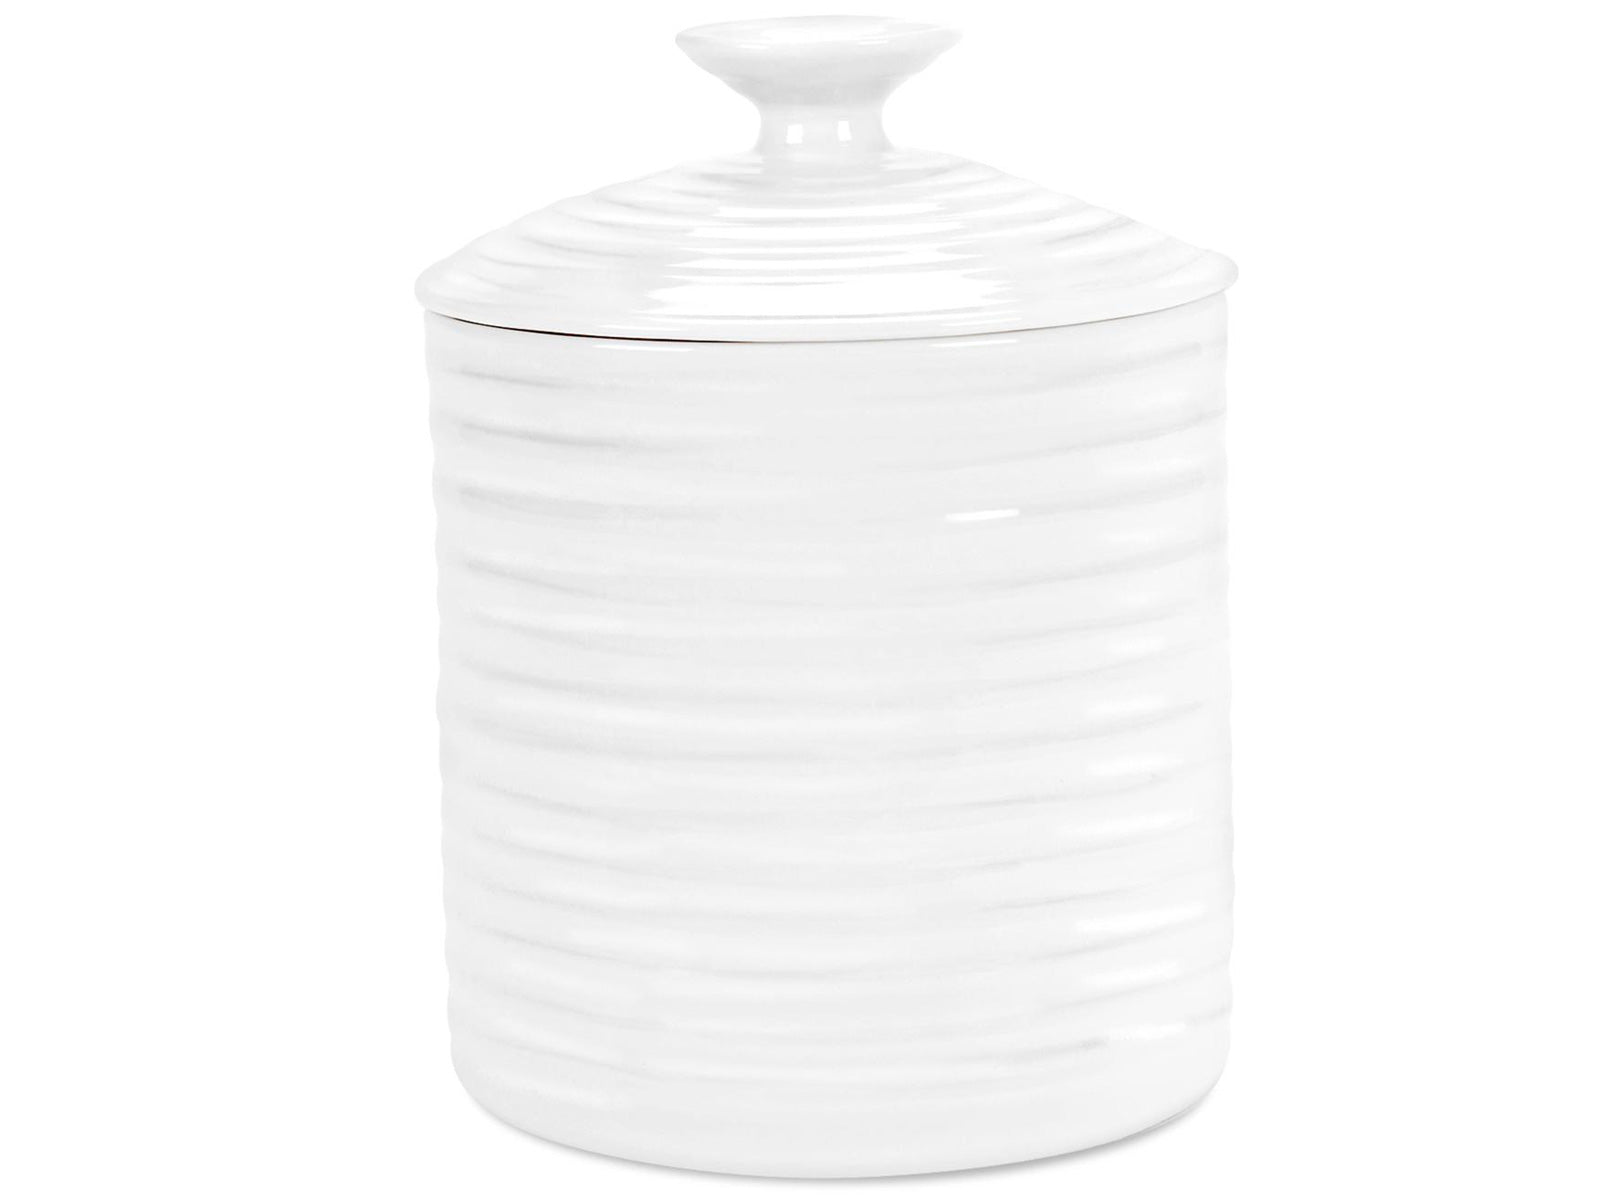 This Sophie Conran Small Storage Jar is made from a white ceramic that has been finished with a clear glaze and designed with Sophie's signature ripple effect. It is petite in side, and would be idea for holding your tea, coffee and sugar in your kitchen.